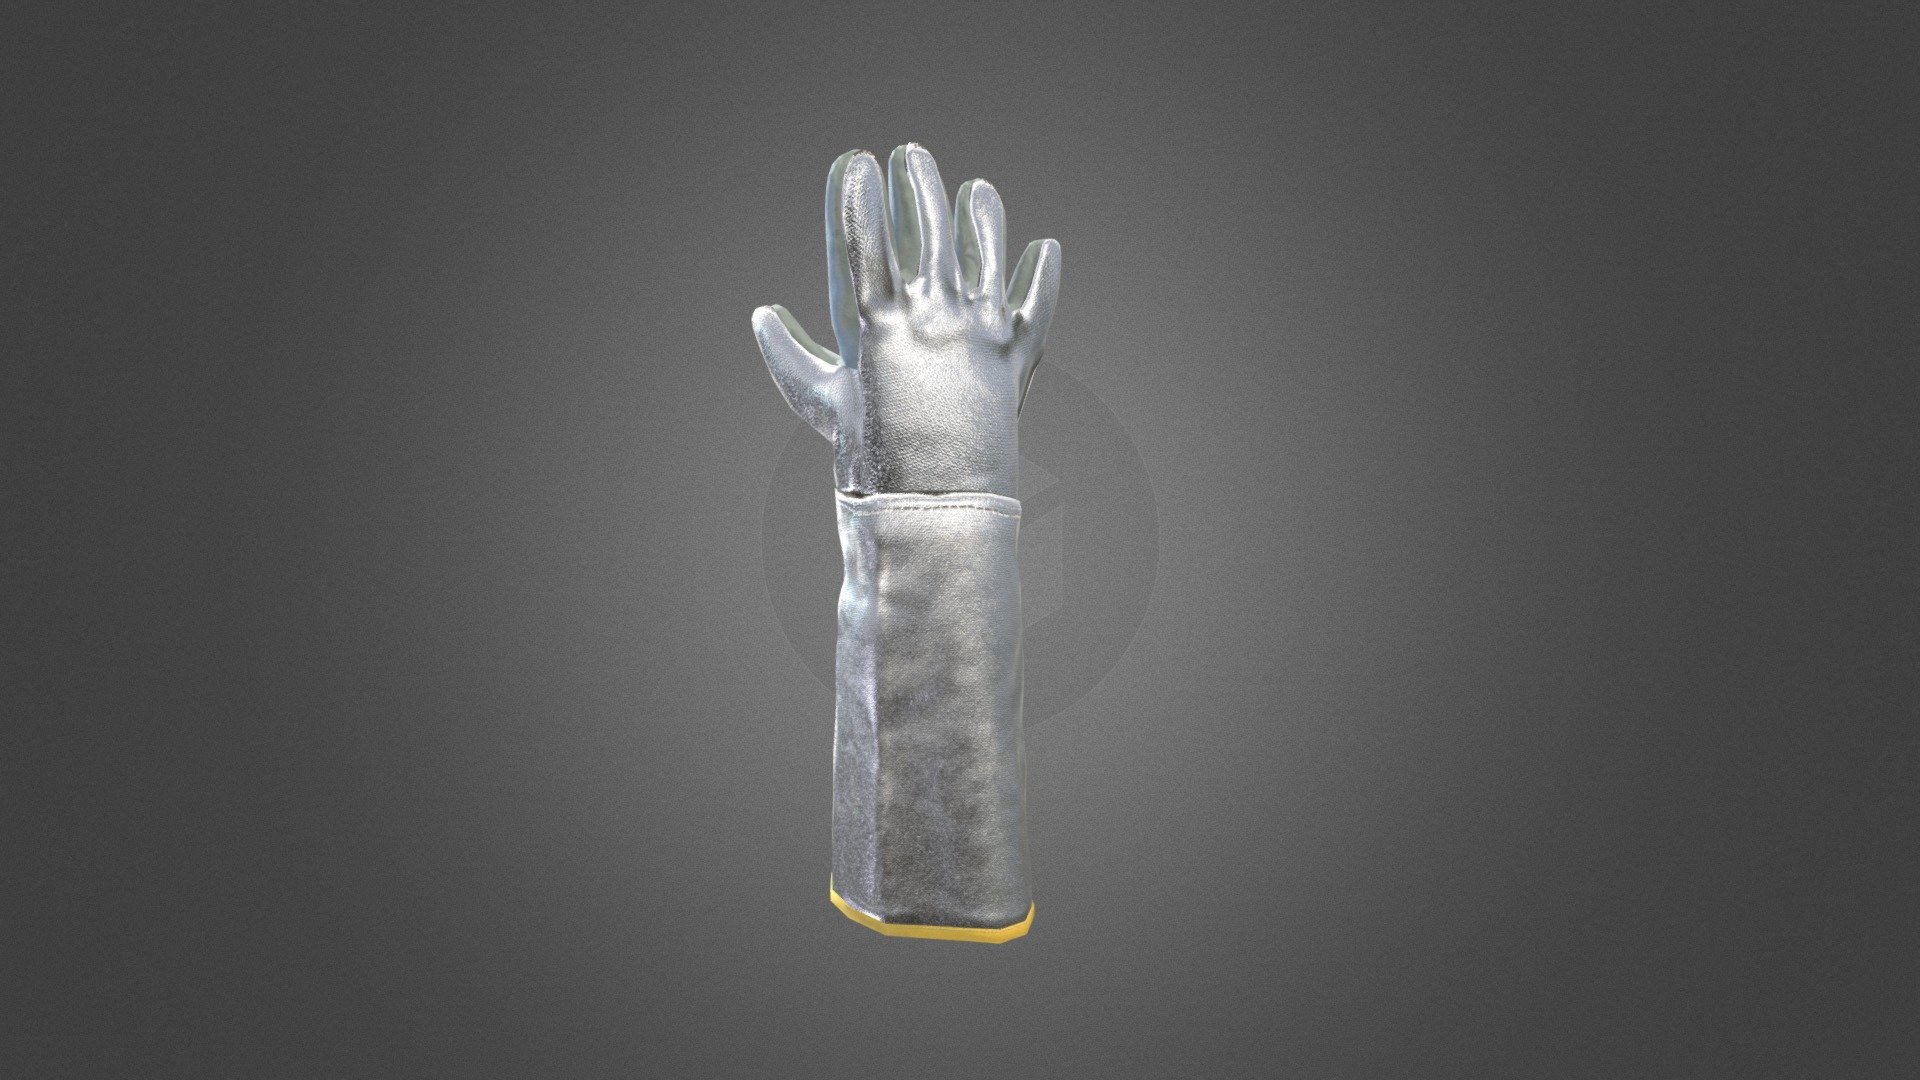 Starting from the Scanning of a real Glove, I reproduced this model to create a future application for the Company that produced it.

The model works in a real time application/ Videogame/ simulation.

Textures made from the beginning in Substance Designer and Painter 3d model